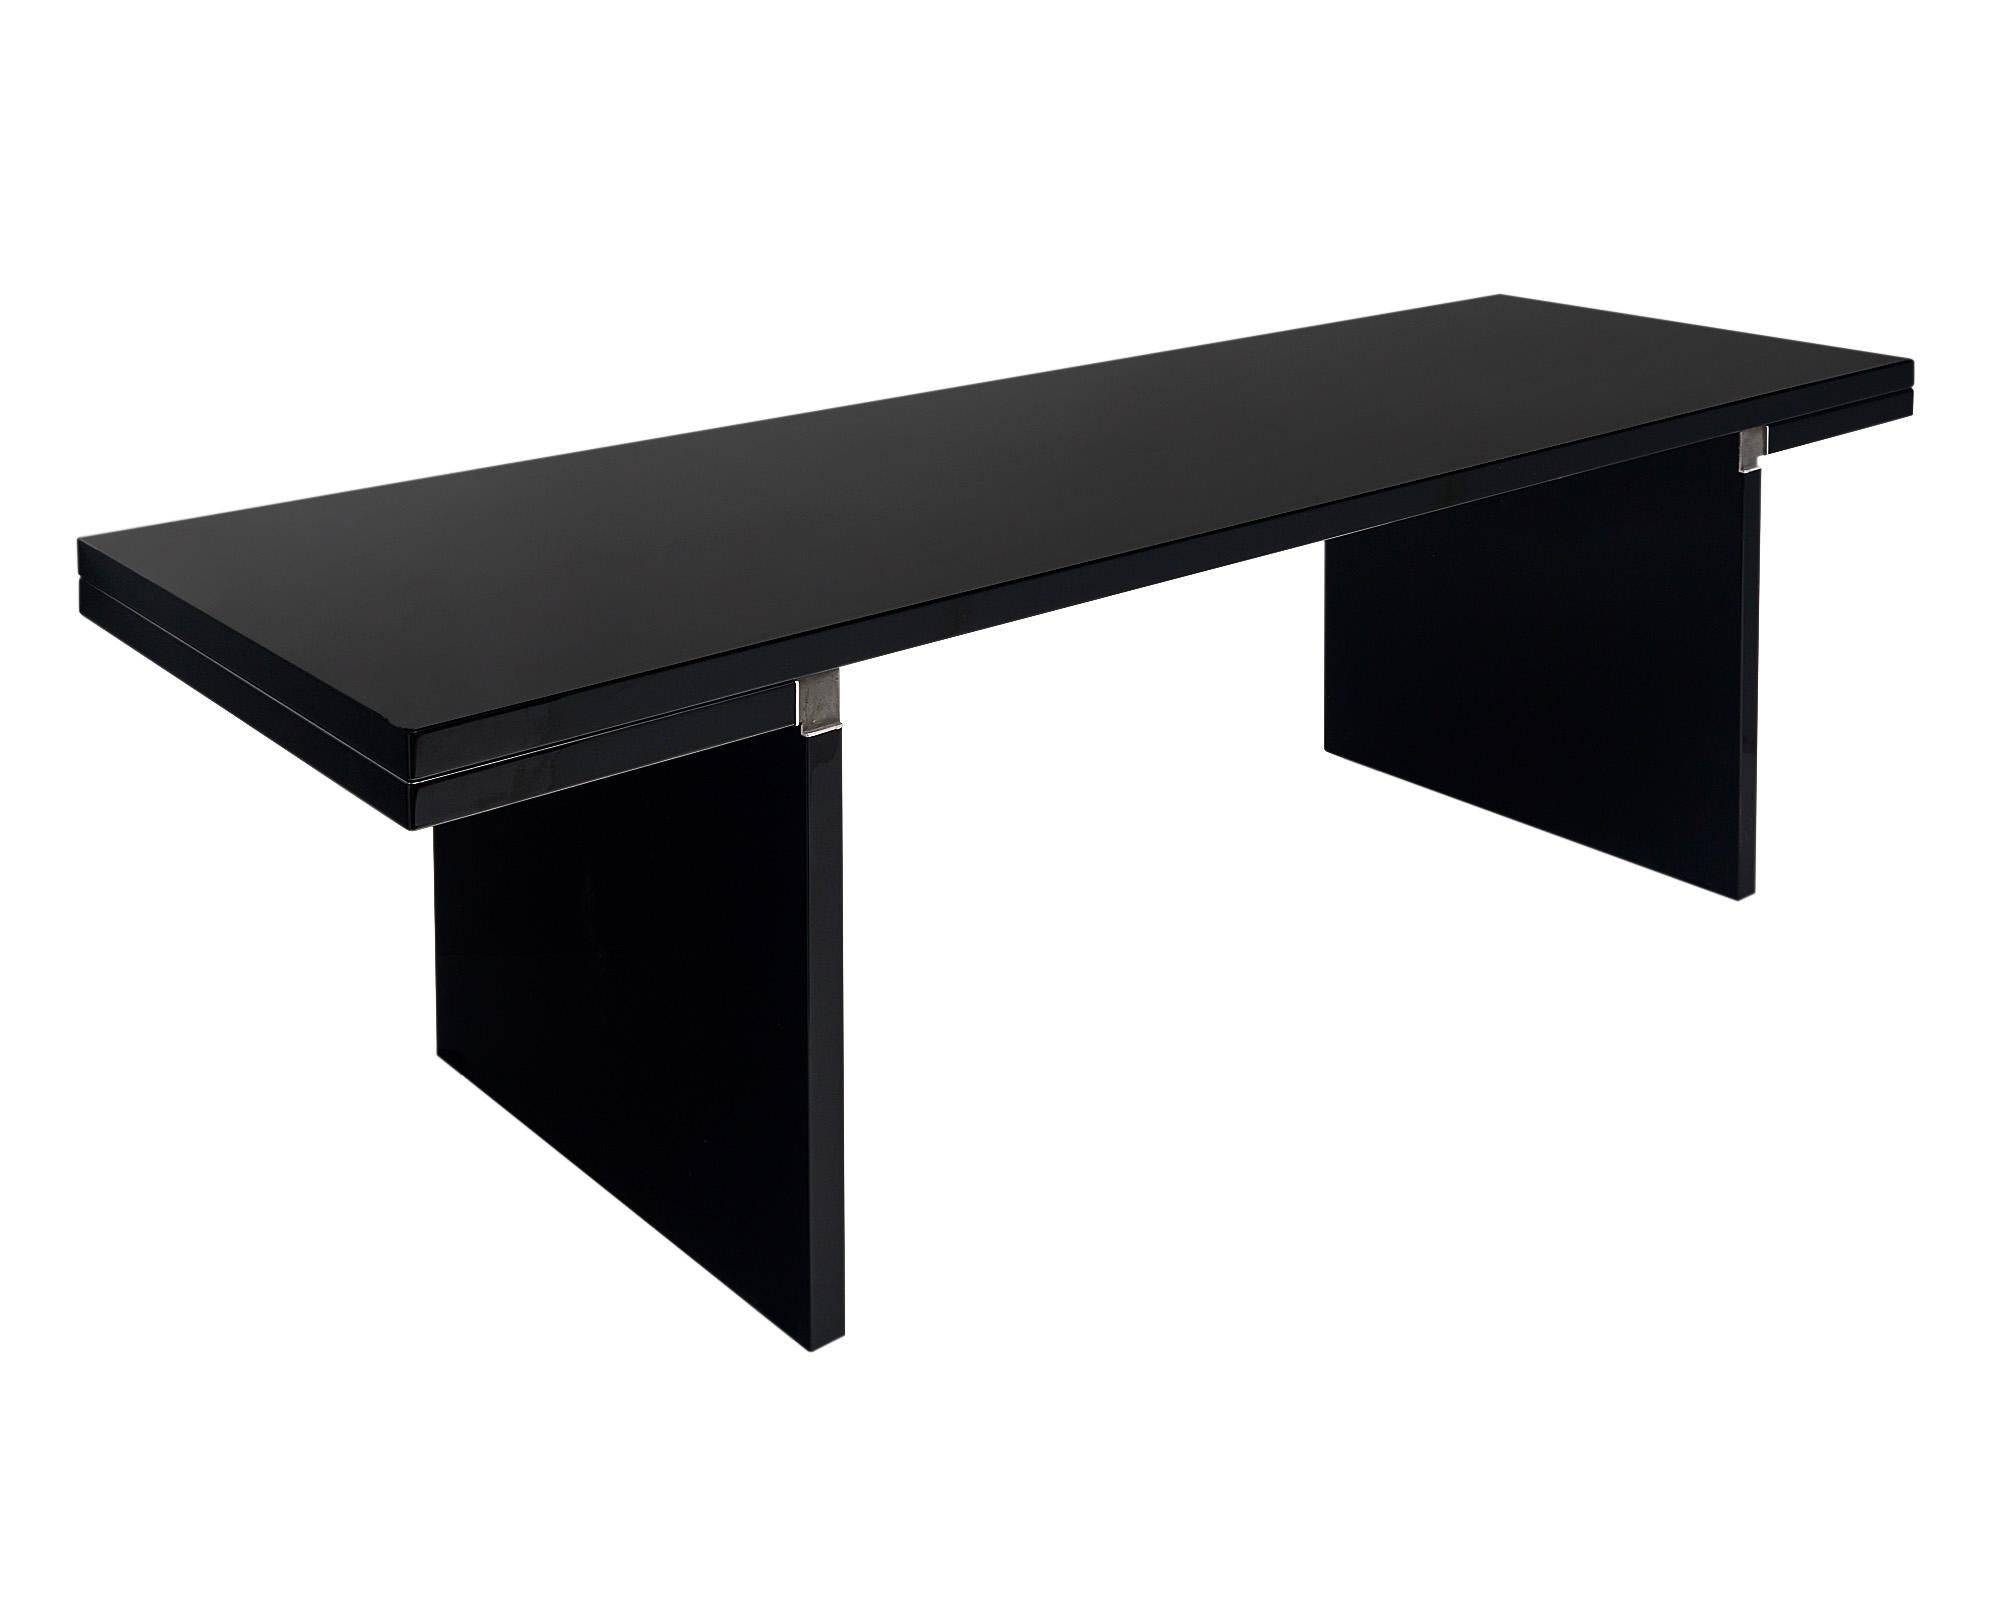 Mid-Century Modern “Orseleo” table by Carlo Scarpa for Cassina